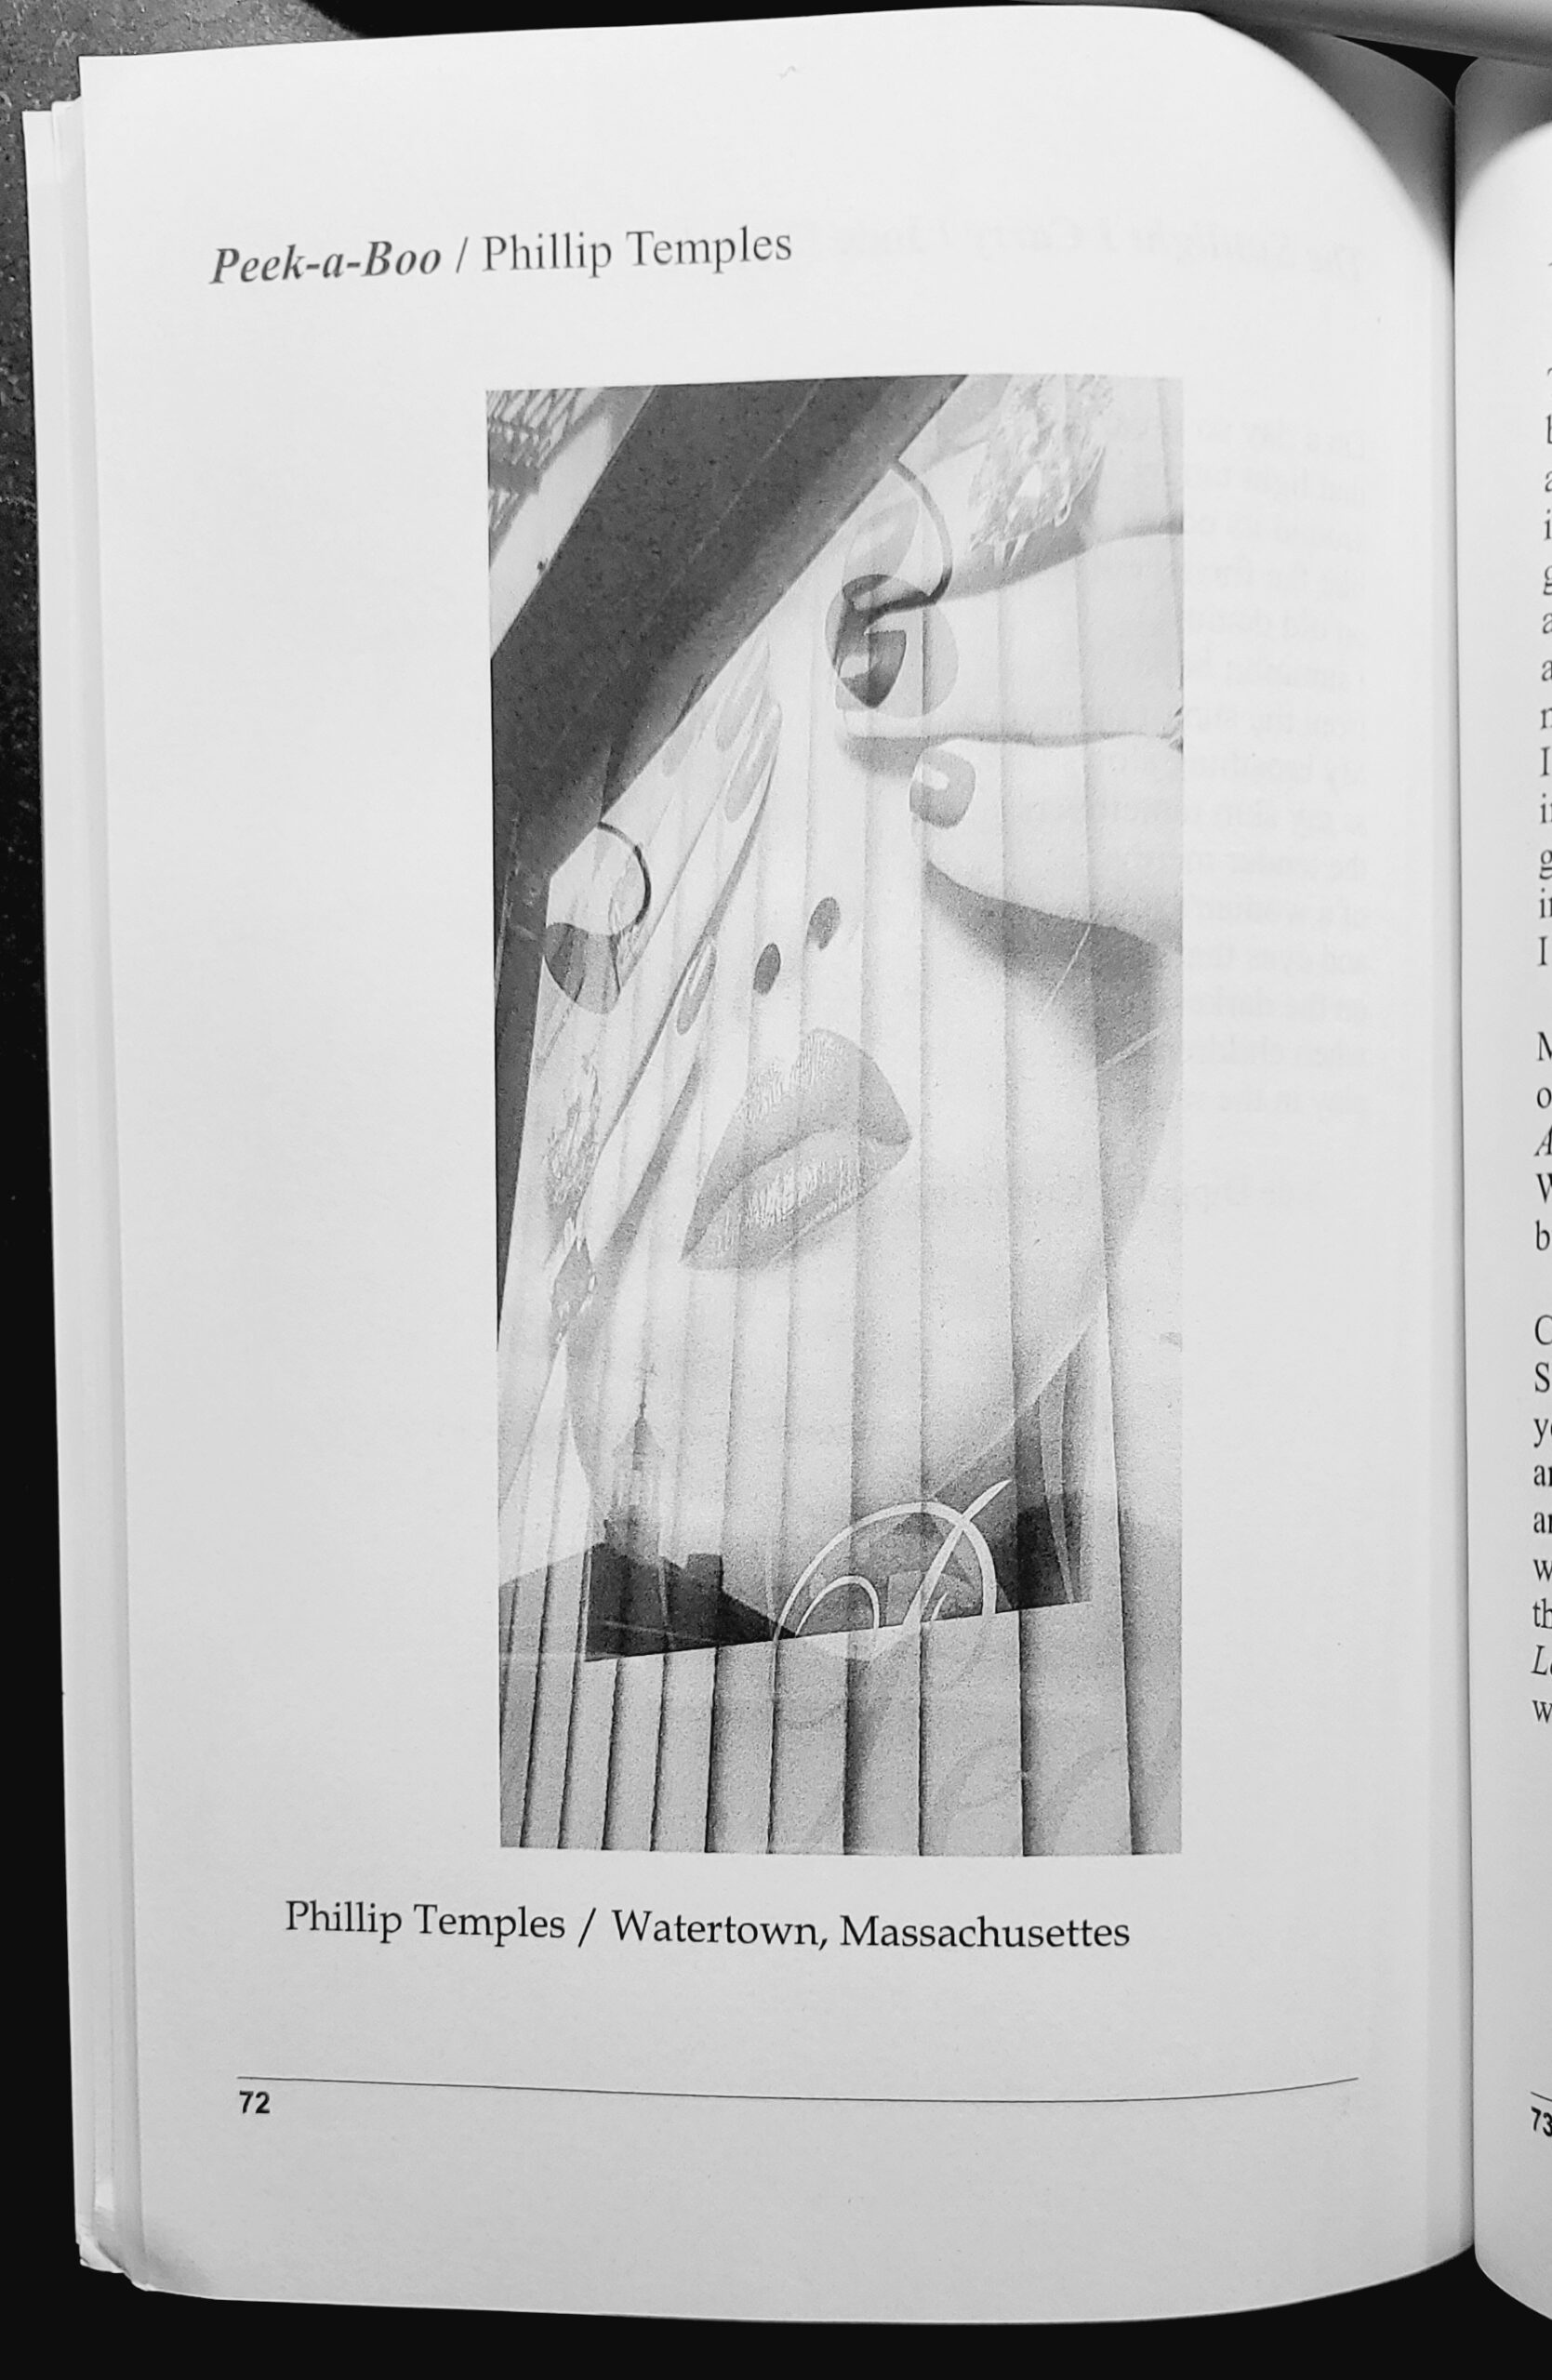 image of "Peek-a-Boo" in  Third Wednesday Magazine